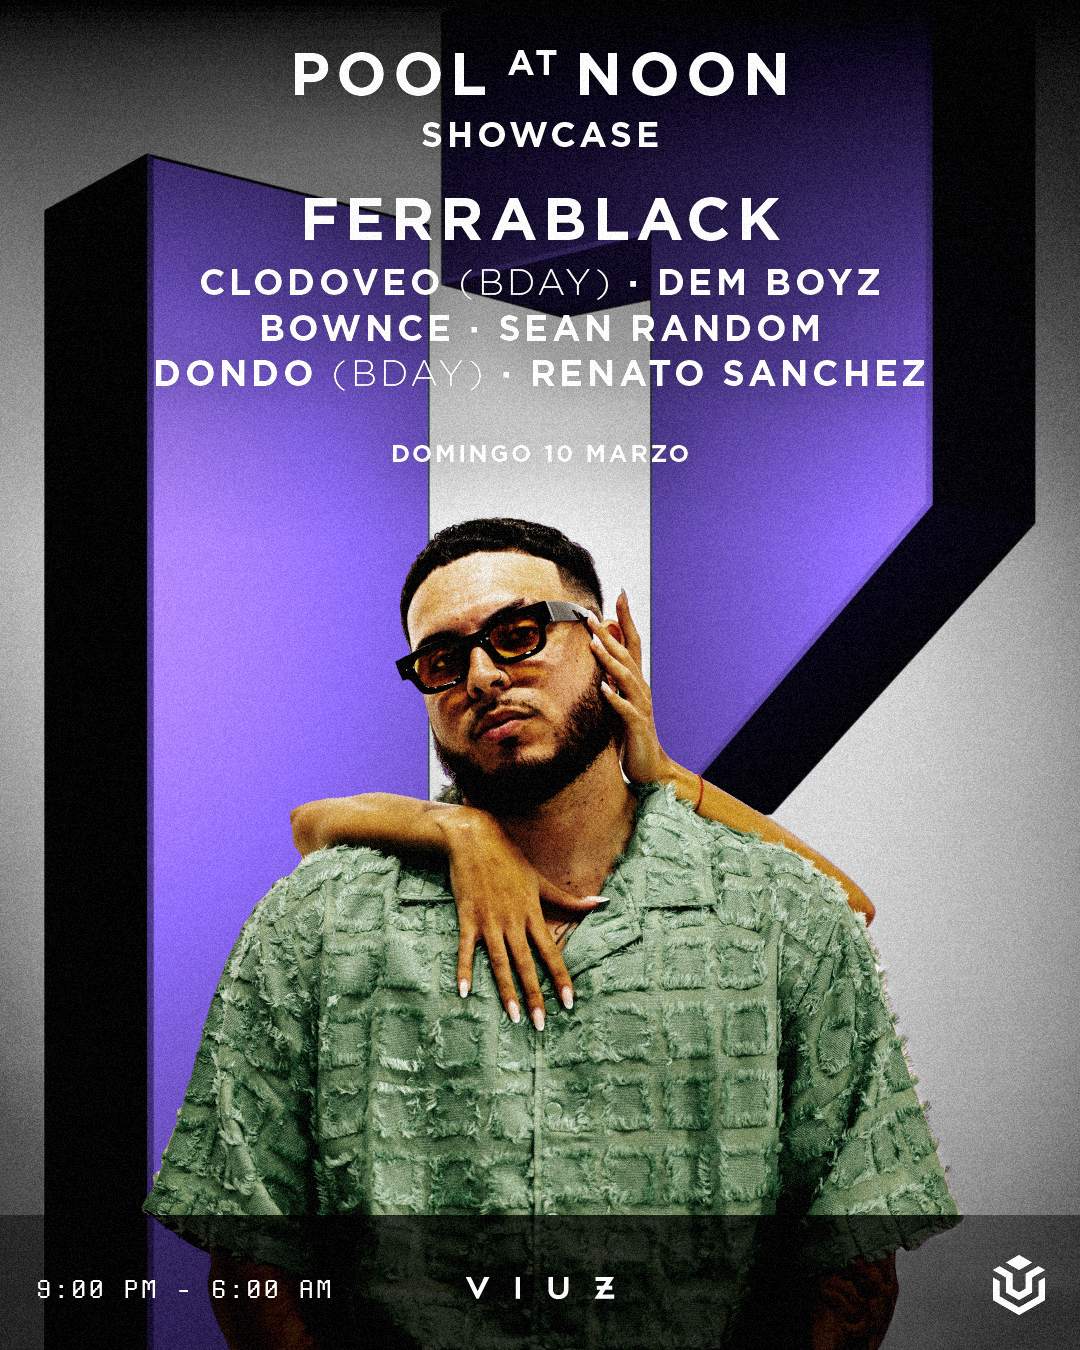 POOL AT NOON SHOWCASE WITH FERRA BLACK - フライヤー表